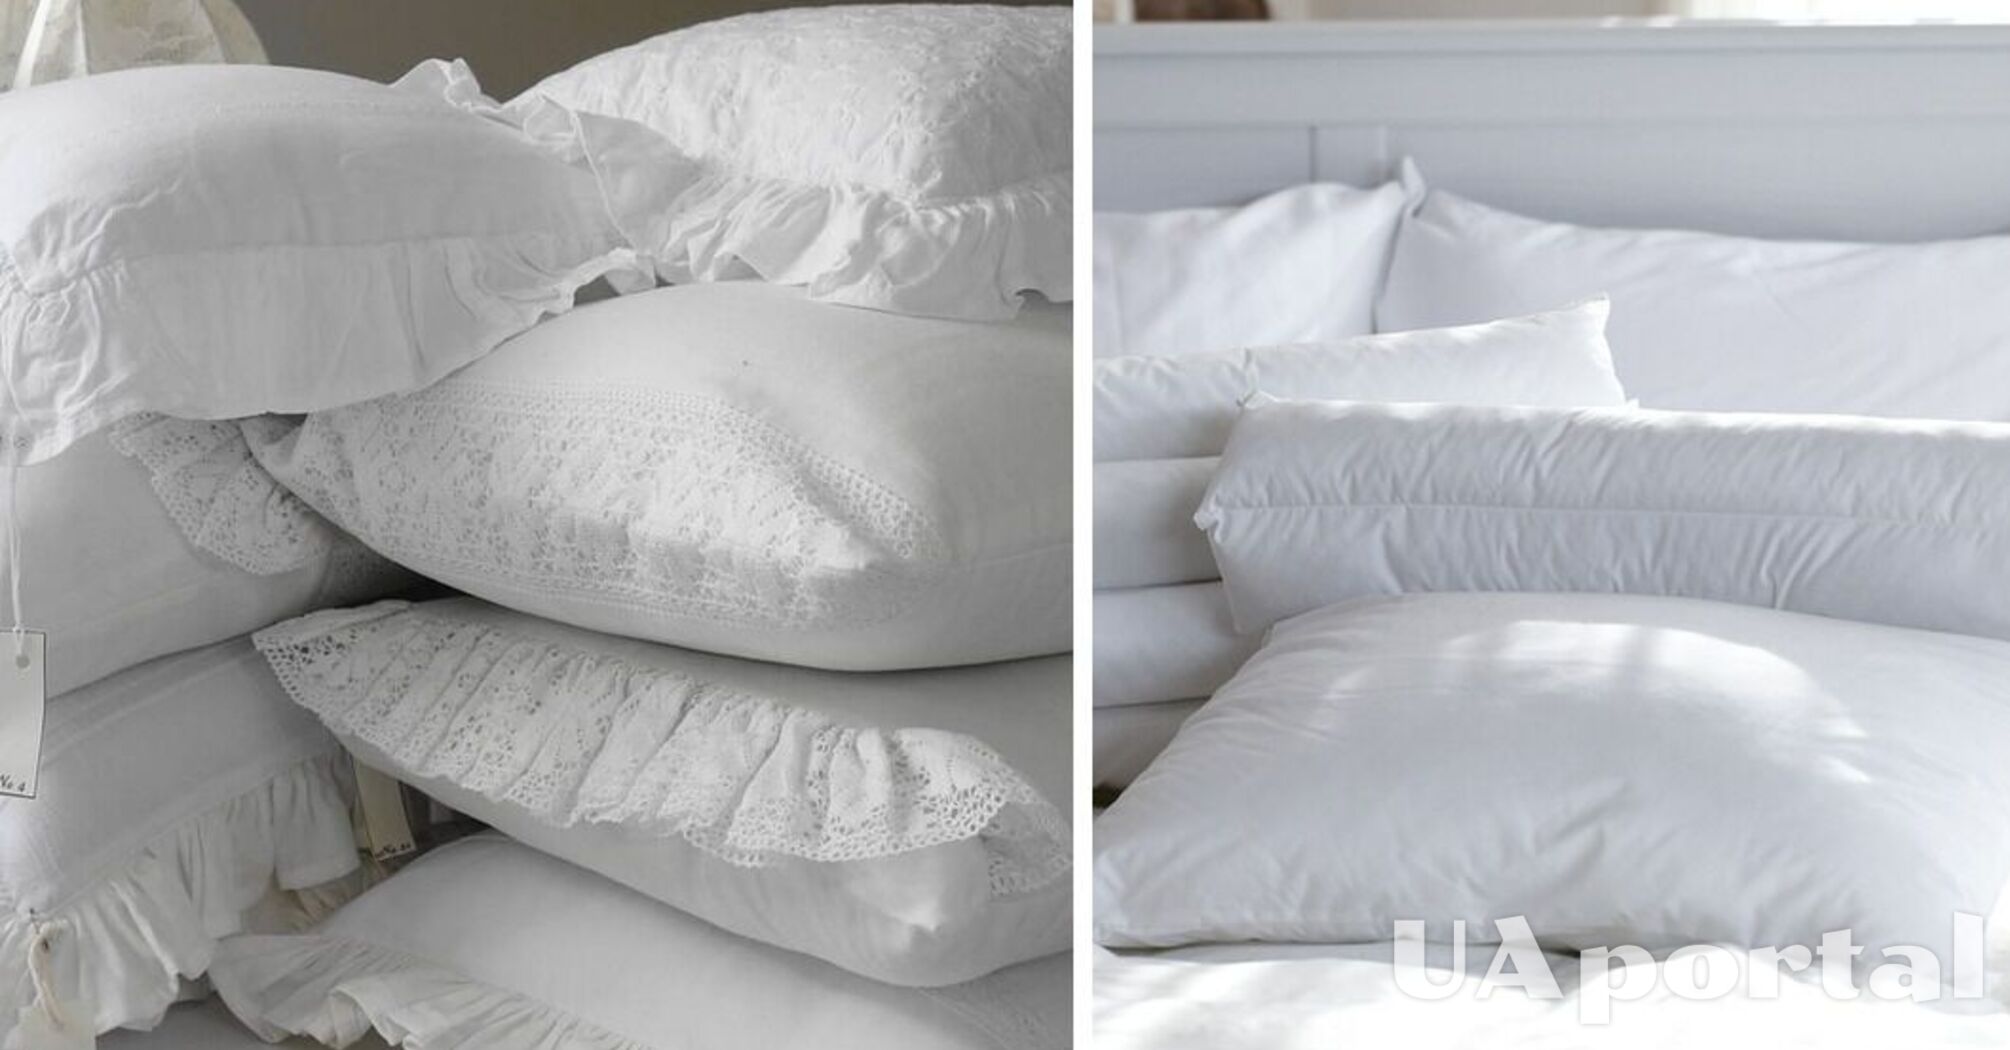 This homemade solution will help remove yellow stains from pillows without a washing machine